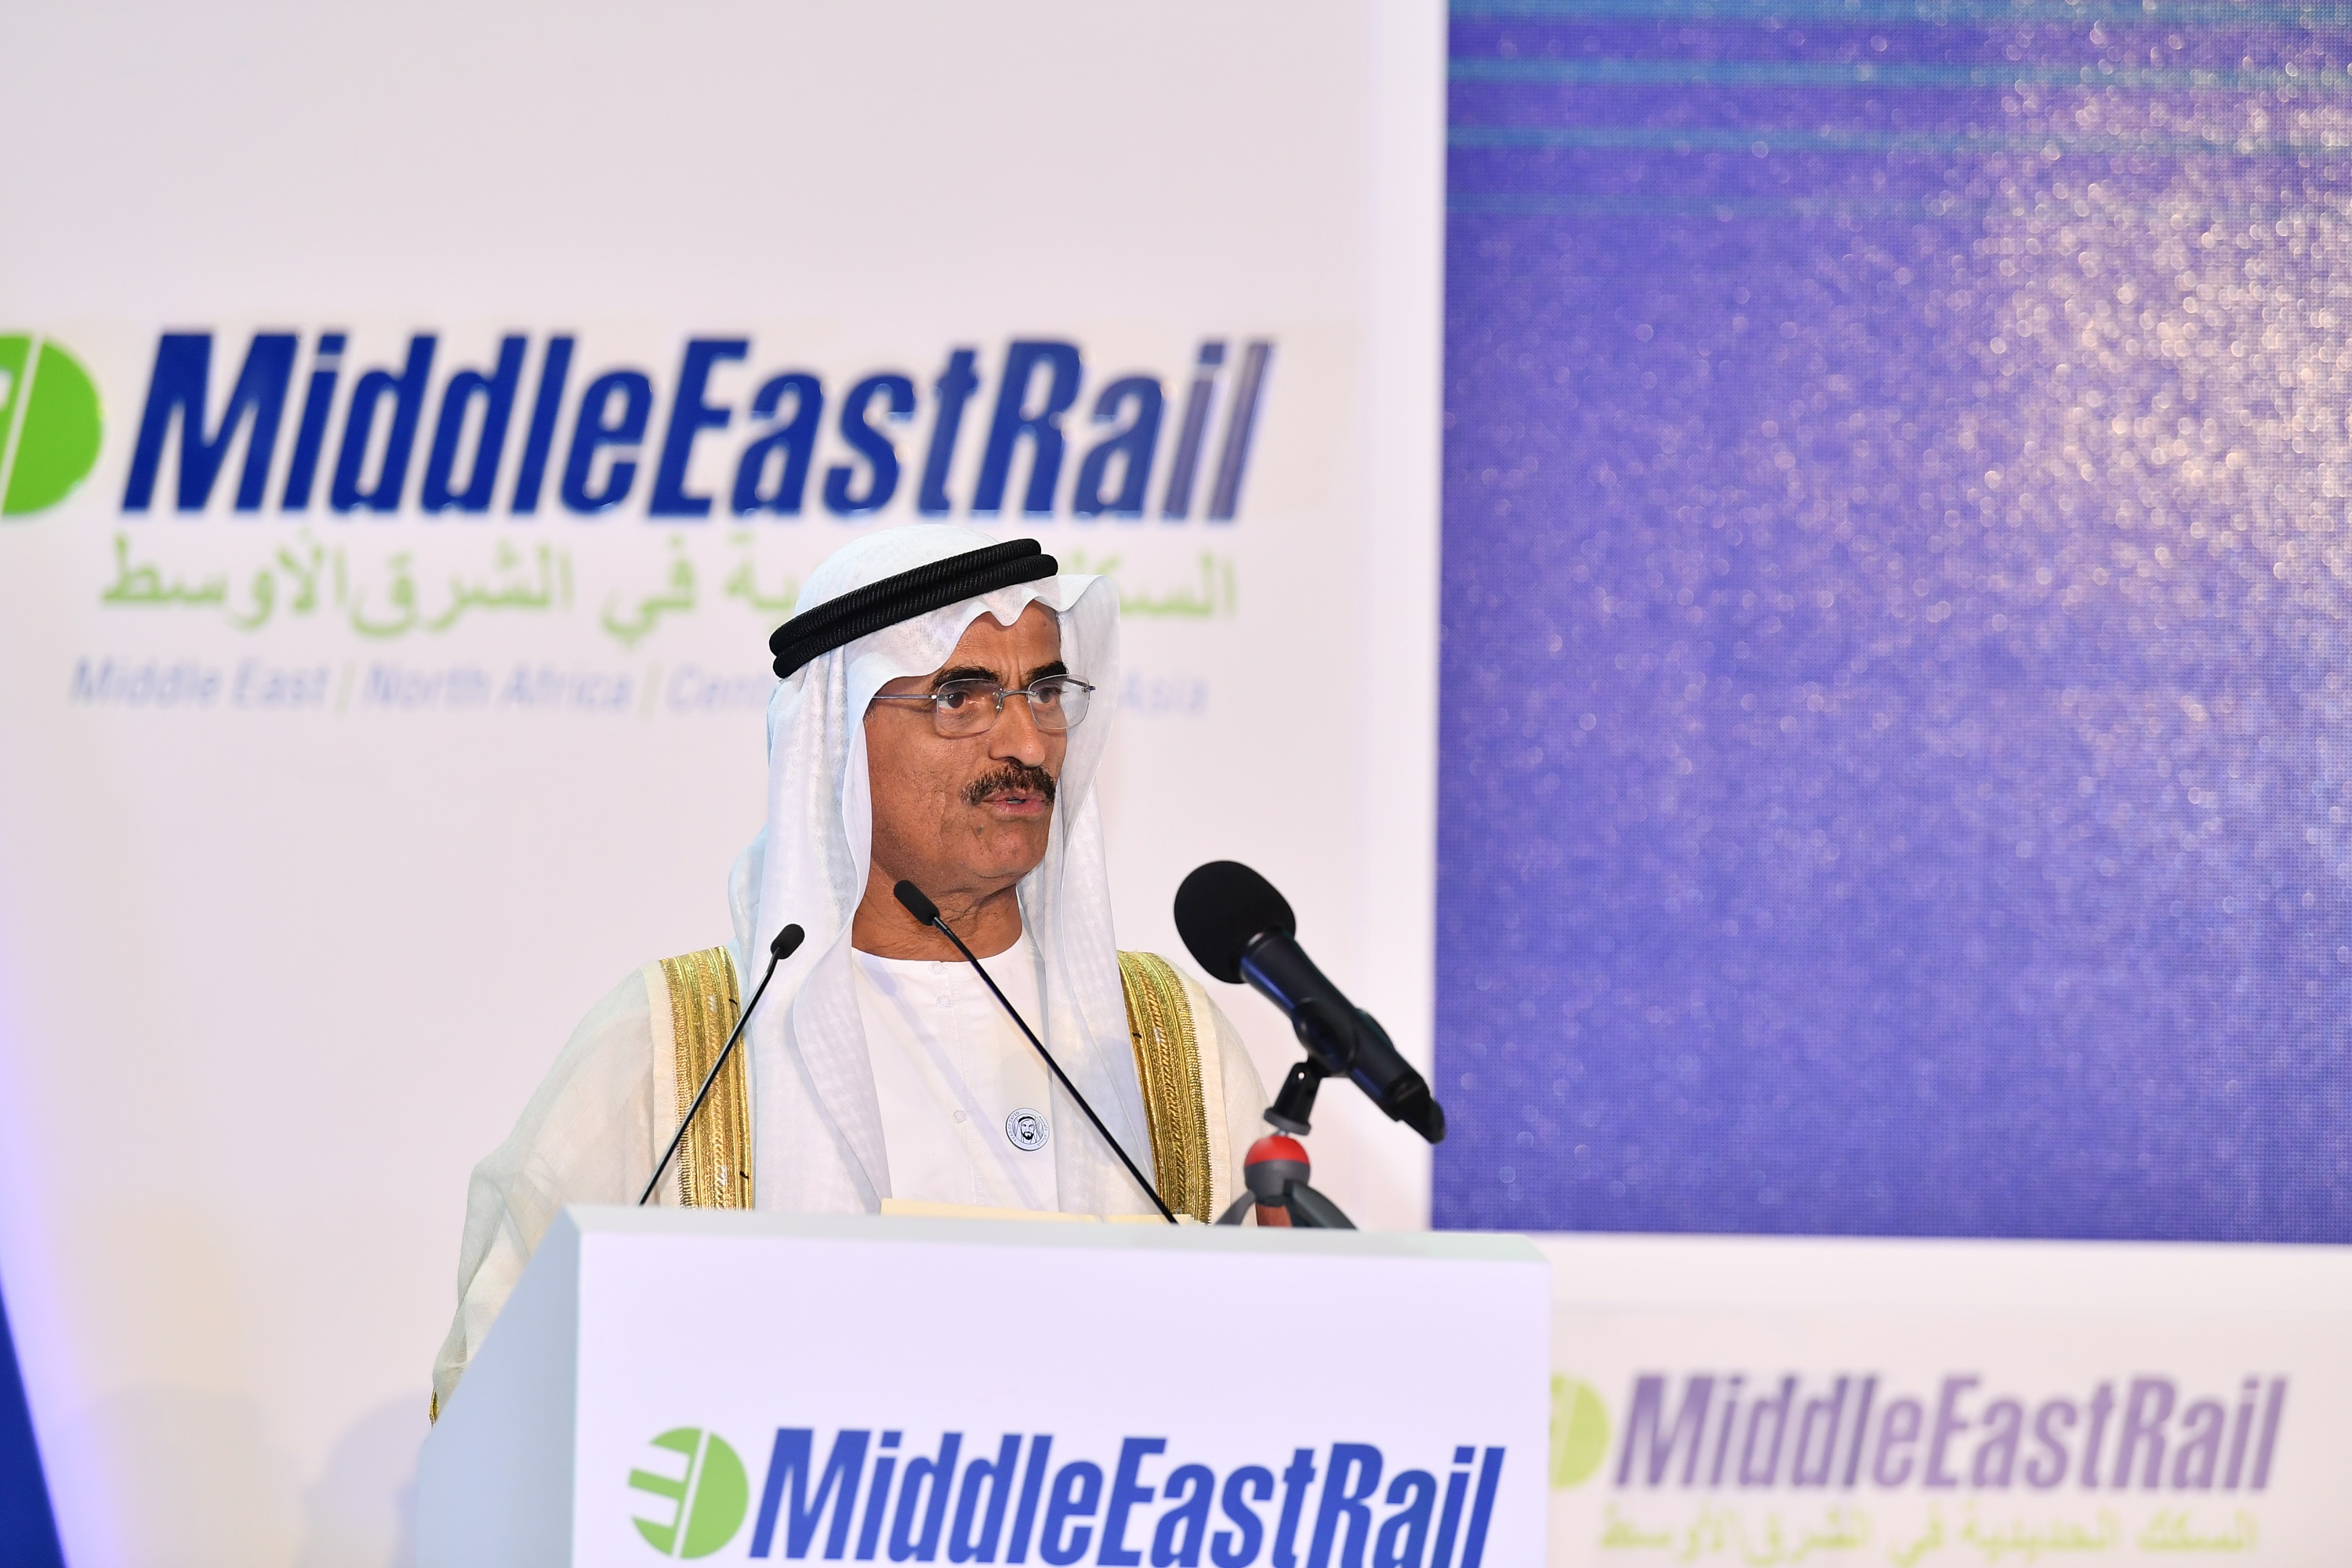 Key railway trends in focus at Middle East Rail